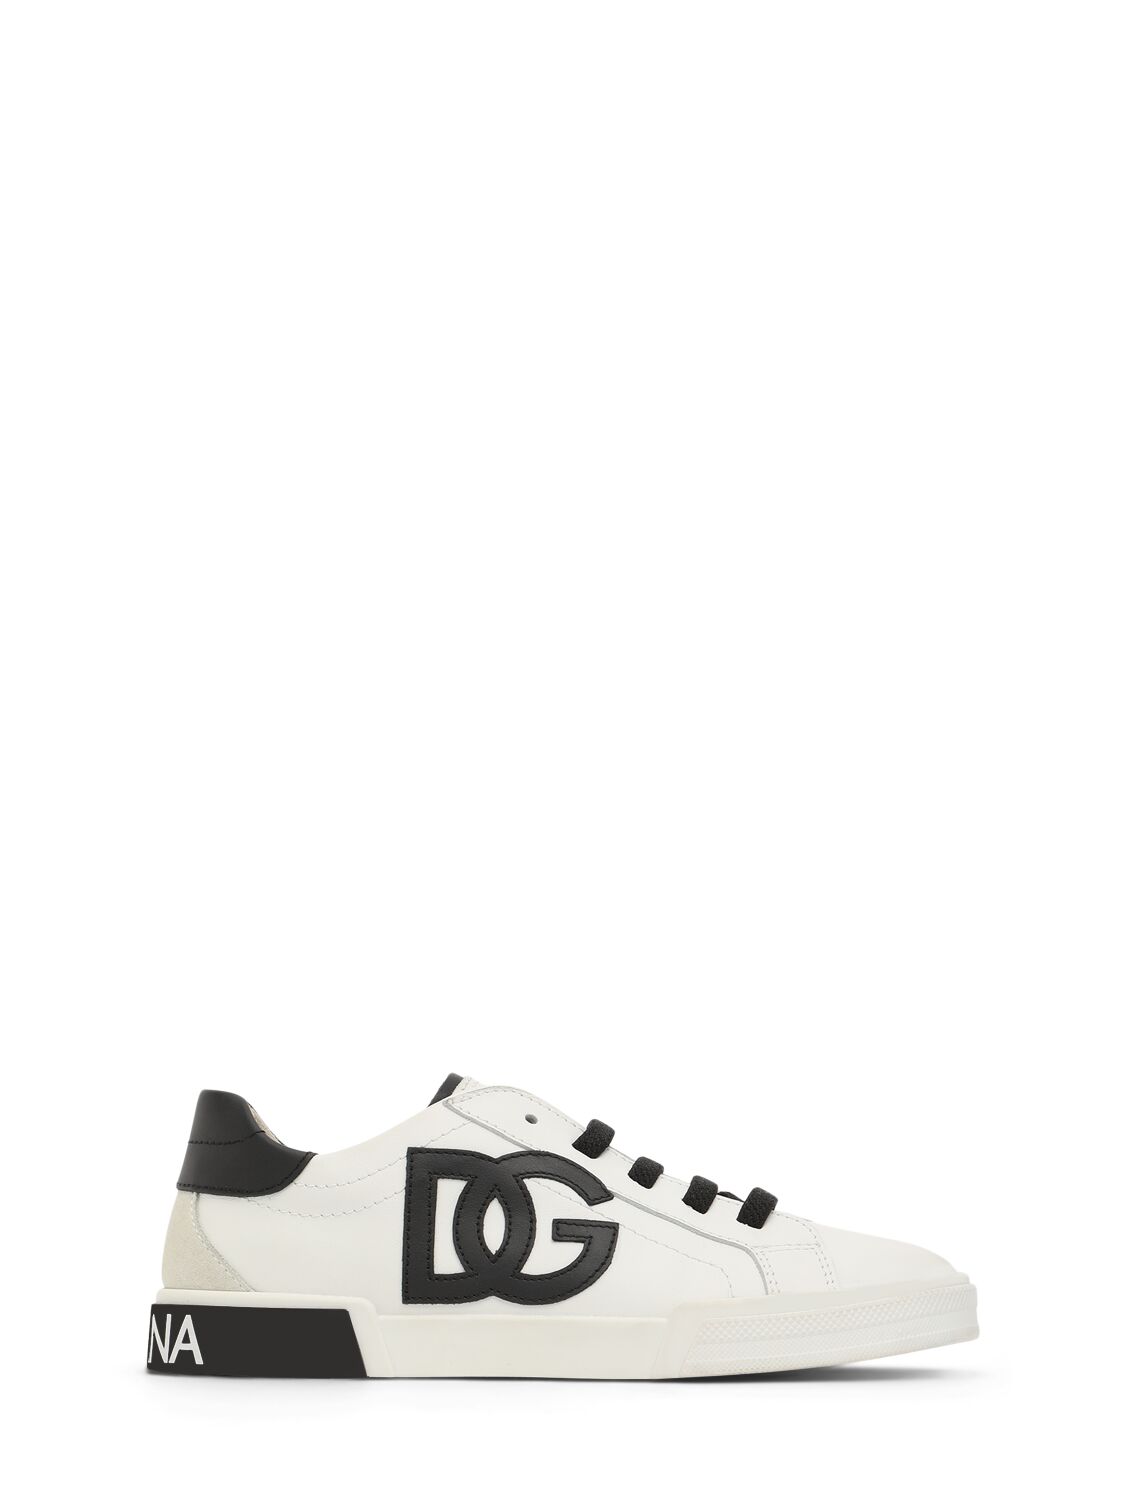 Dolce & Gabbana Logo Print Leather Lace-up Sneakers In White/black